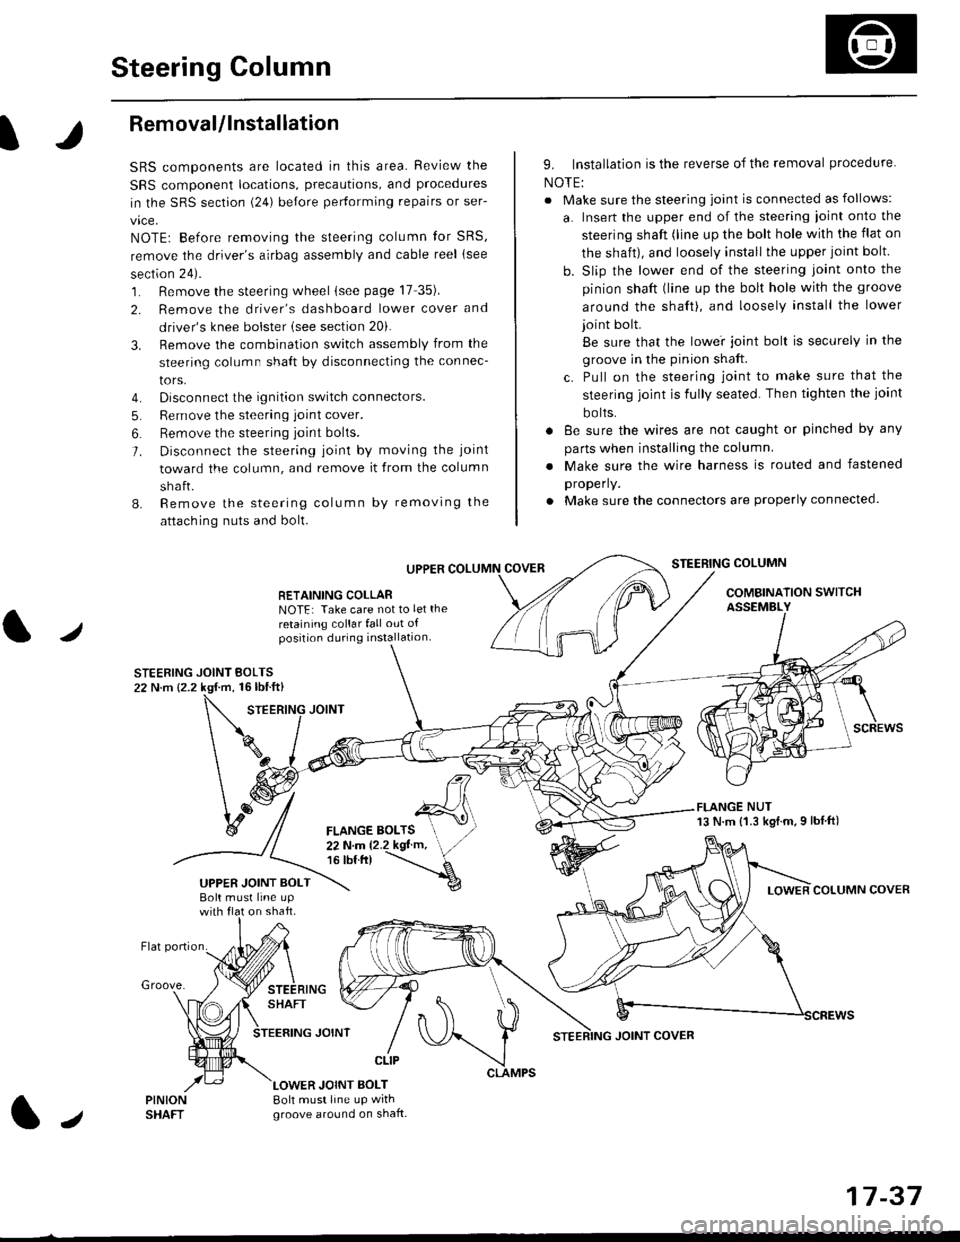 HONDA CIVIC 1996 6.G Workshop Manual Steering Column
I
Removal/lnstallation
SRS components are located in this area. Review the
SRS component locations, precautions, and proceclures
in the SRS sectron (24) before pertorming repairs or se